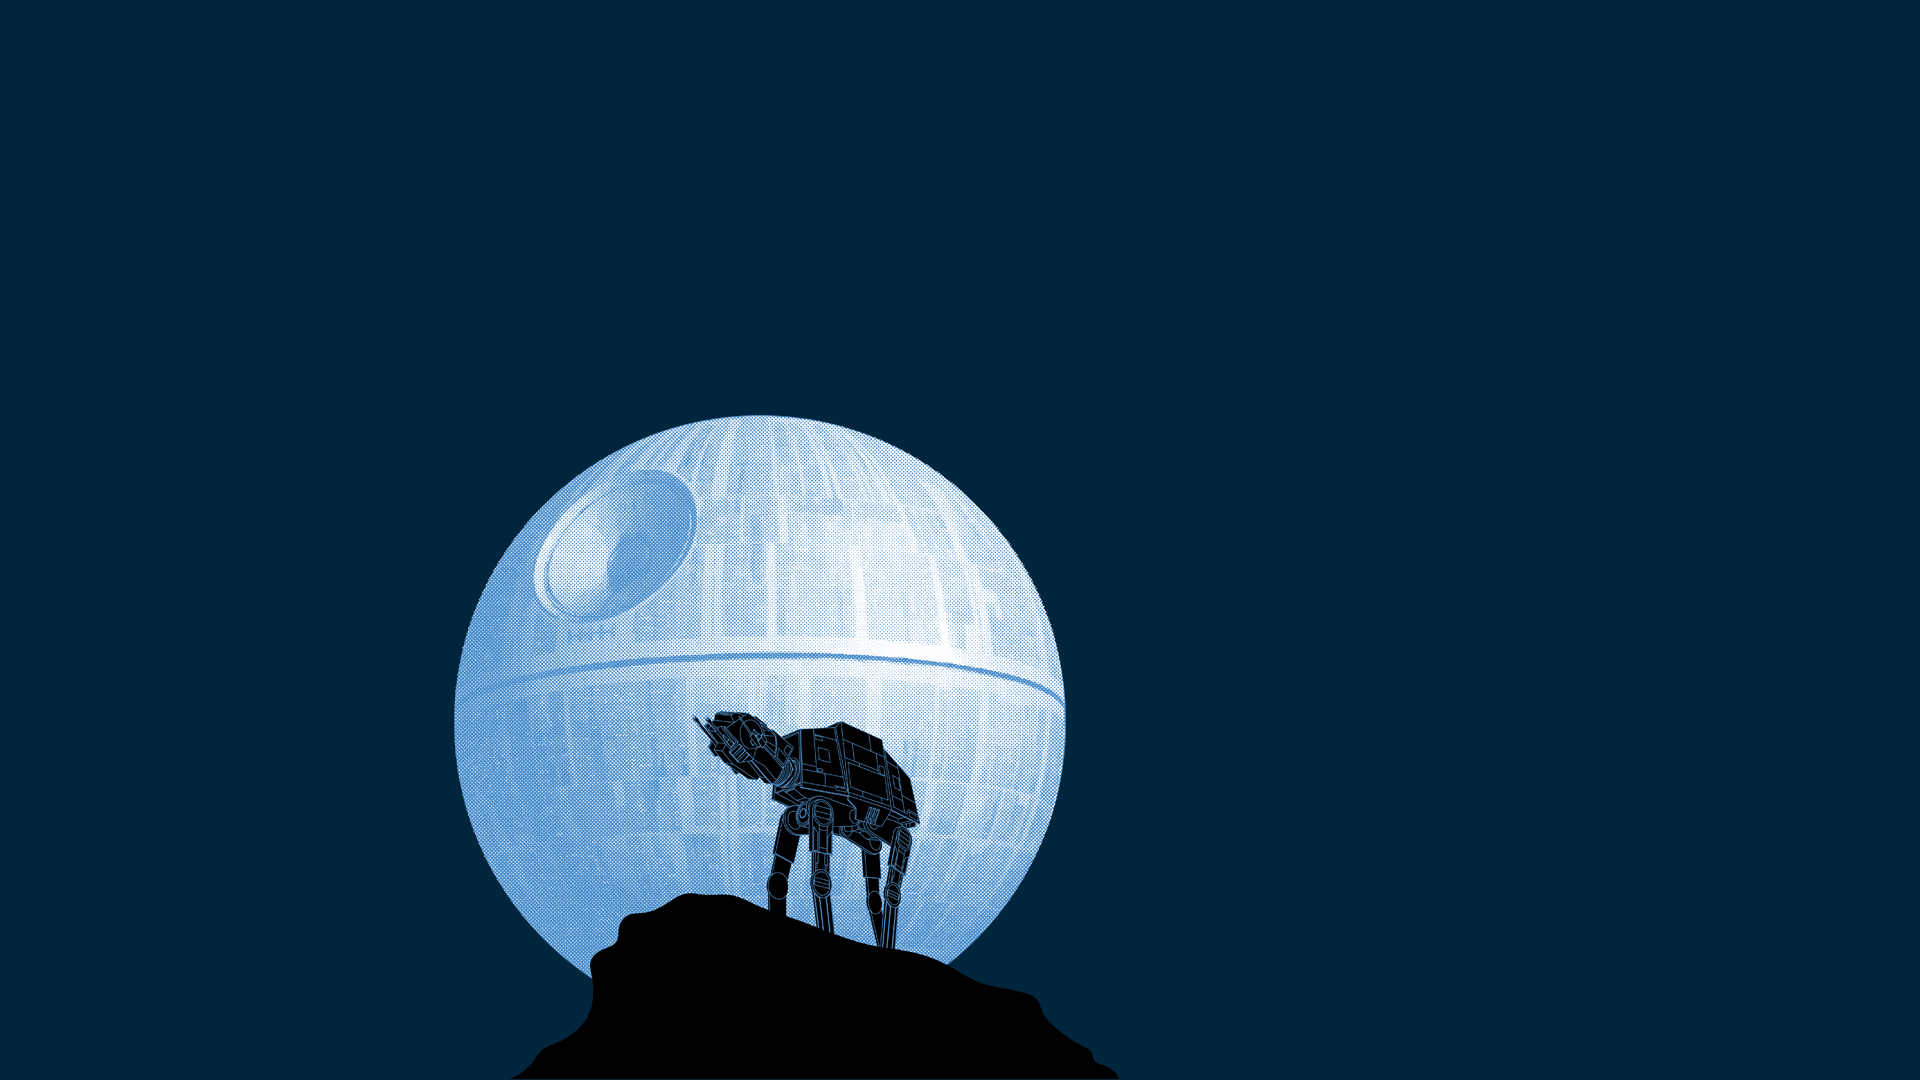 Star Wars Minimalistic Humor Wallpapers Hd Desktop And Mobile Backgrounds